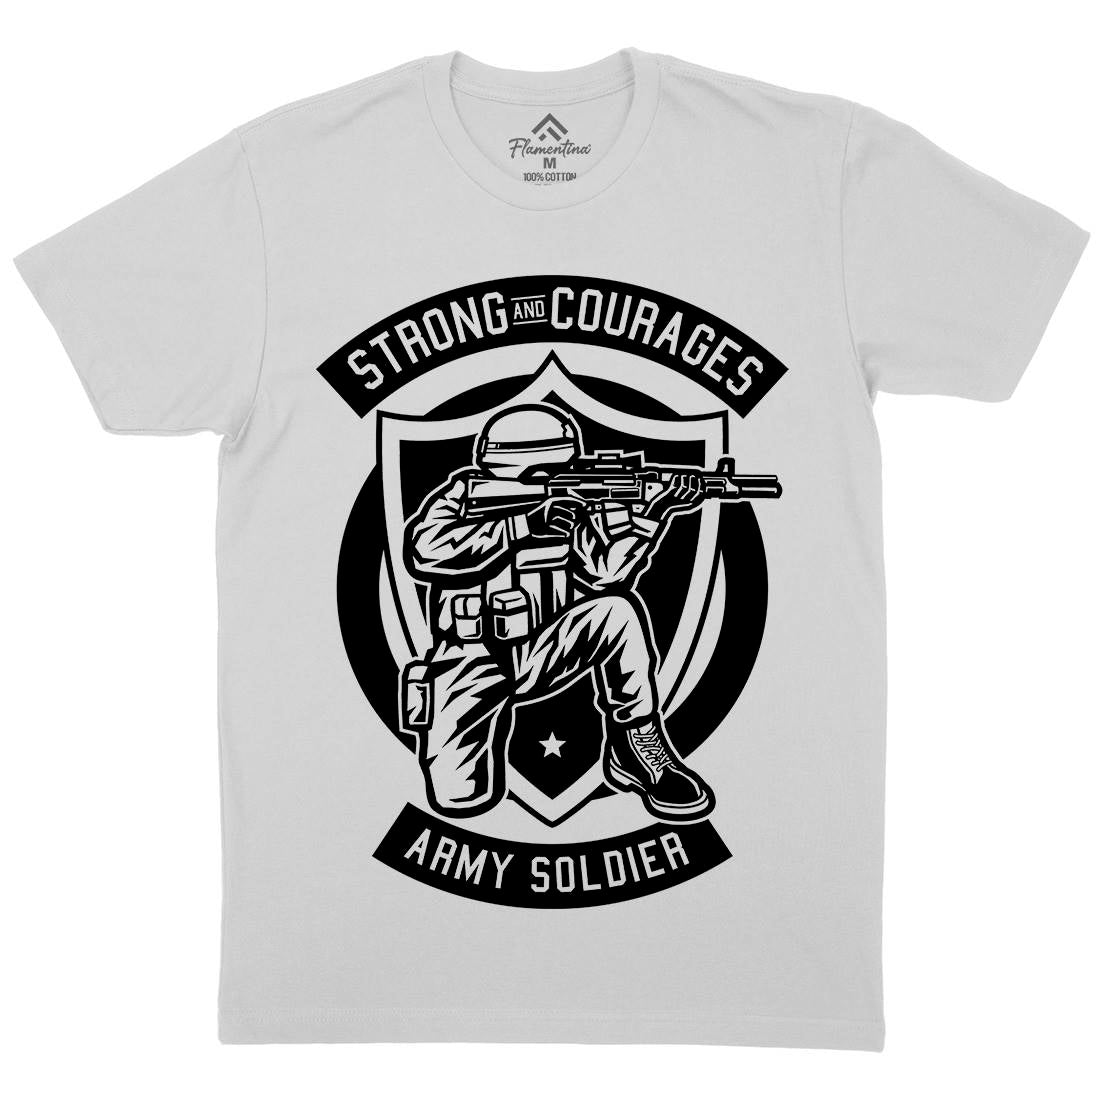 Army Soldier Mens Crew Neck T-Shirt Army B483